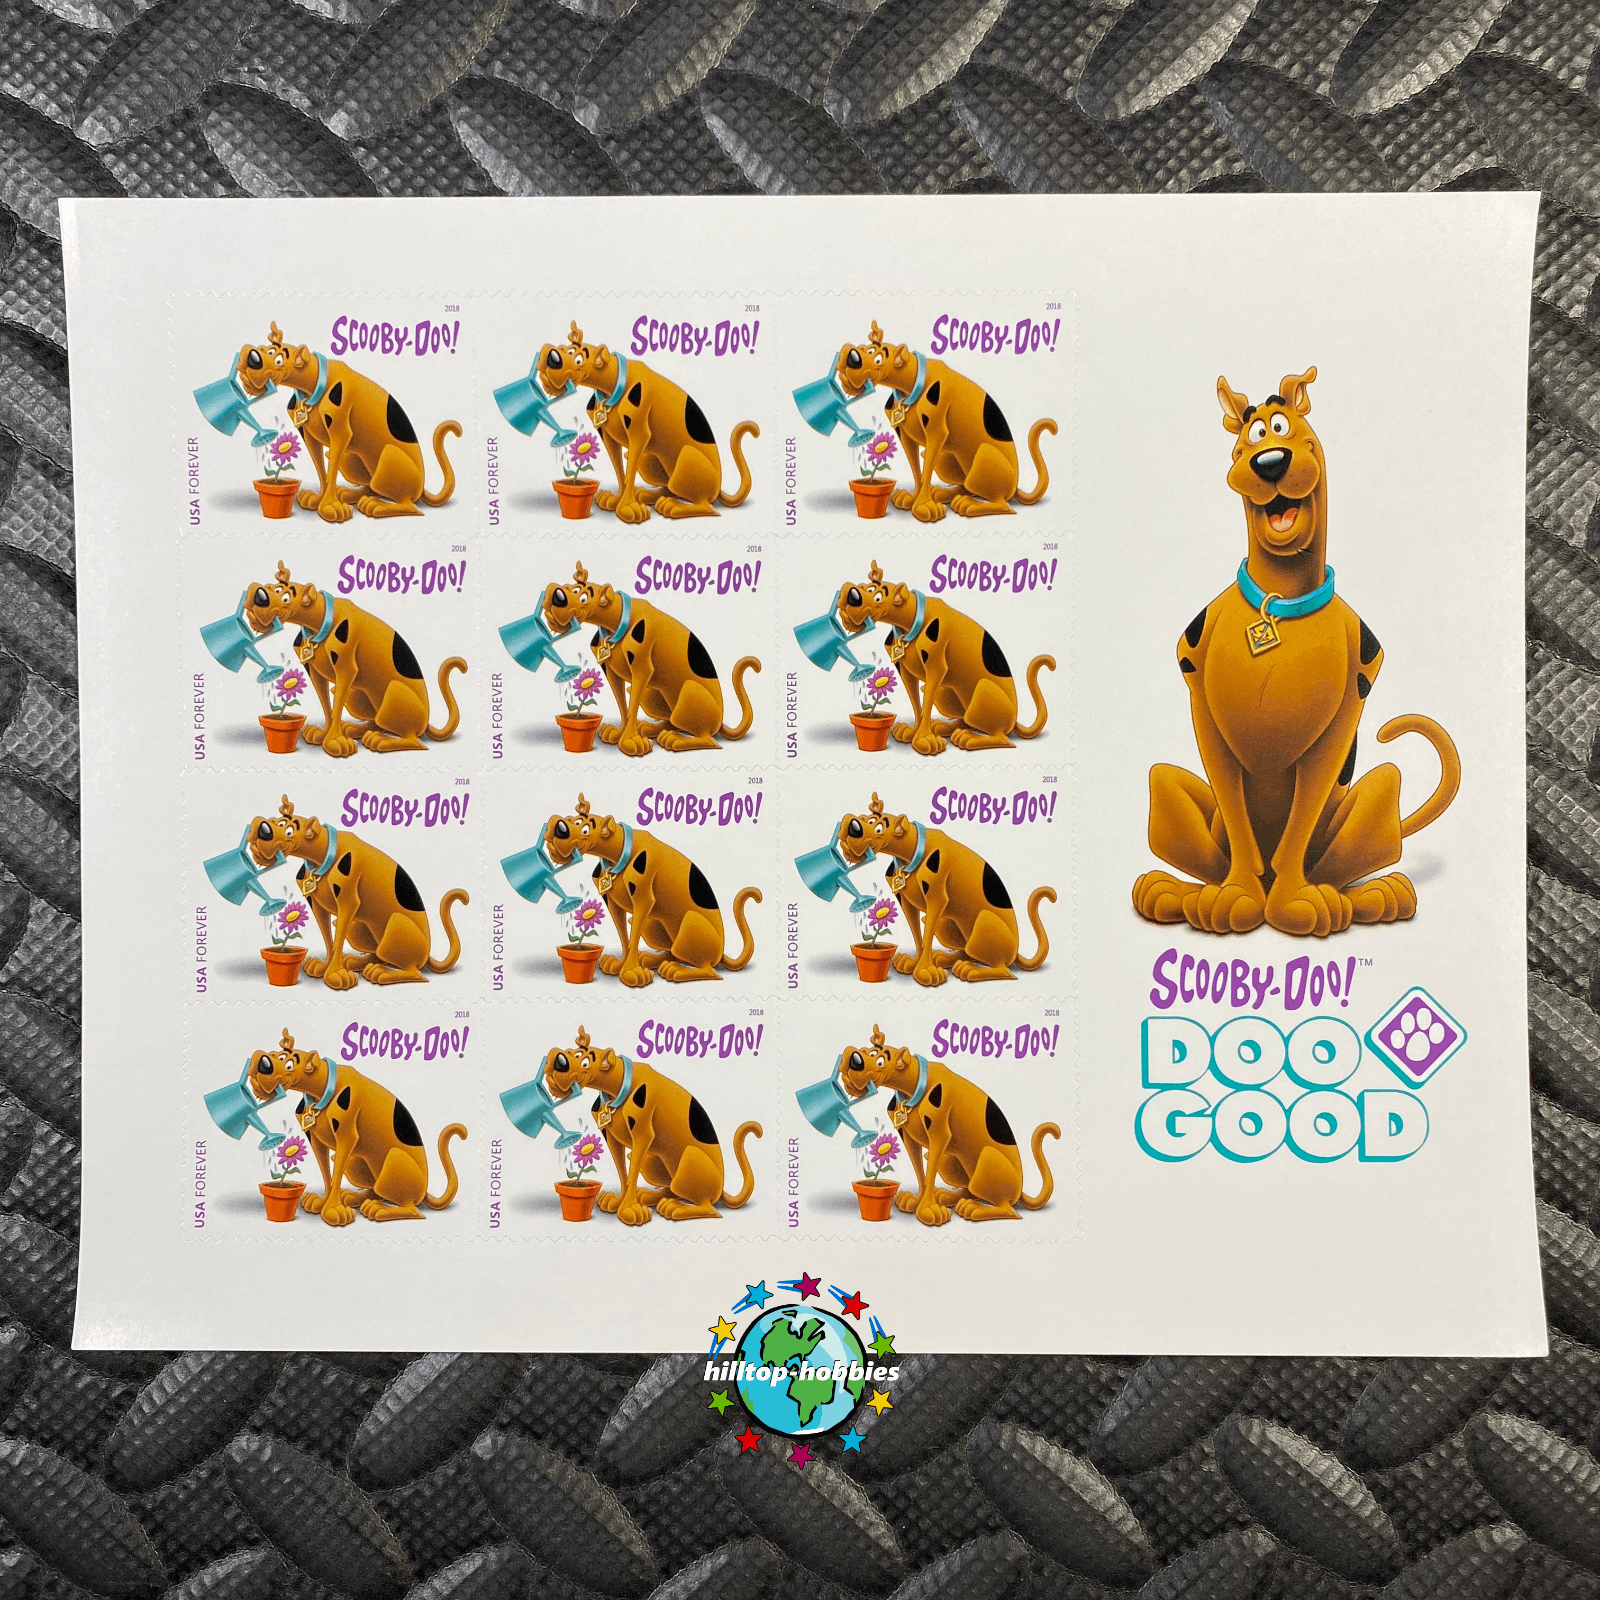 2018 USPS SHEET OF 12 FIRST CLASS FOREVER STAMPS SCOOBY DOO